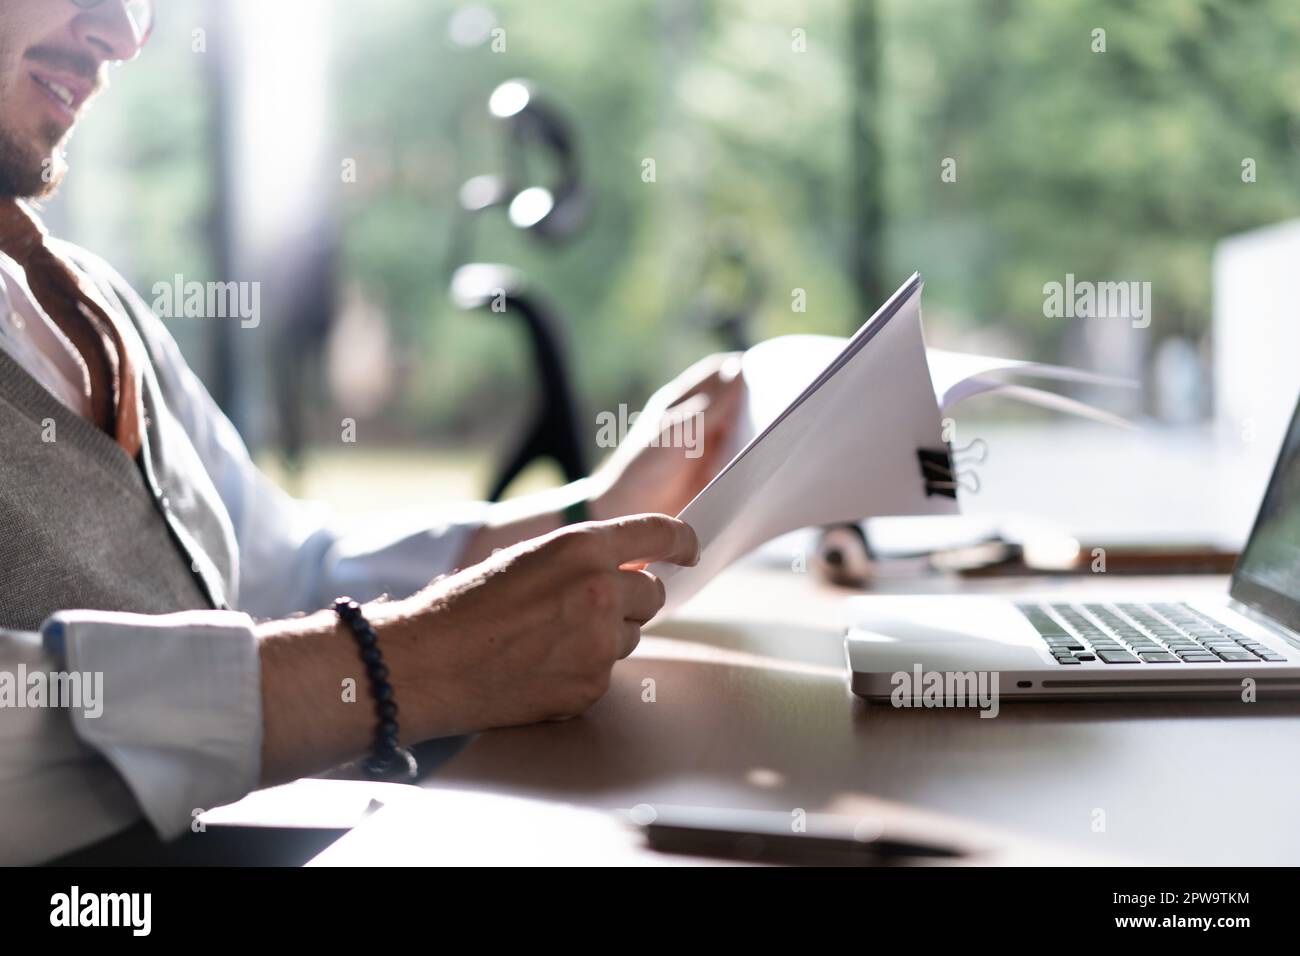 Businessman hands holding pen for working with stack of paper files, searching information, business report papers and piles of unfinished documents i Stock Photo